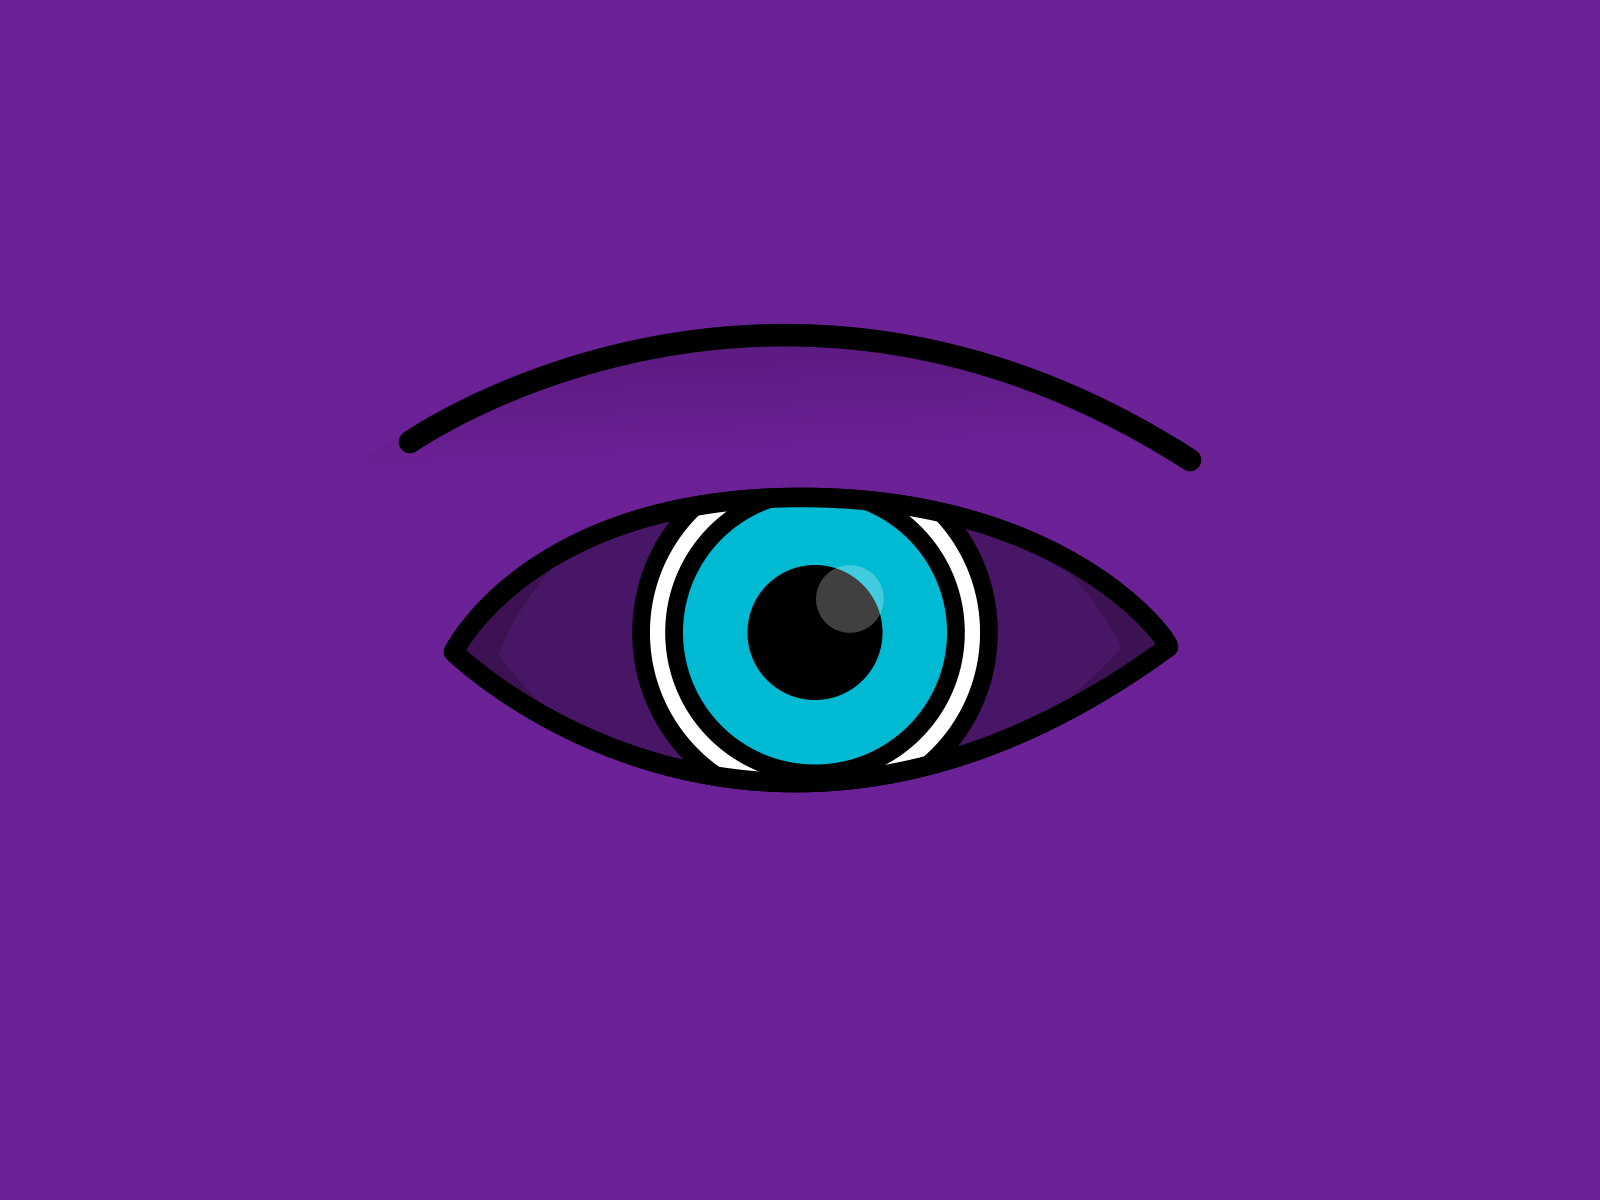 I see you. by Adam Hill on Dribbble